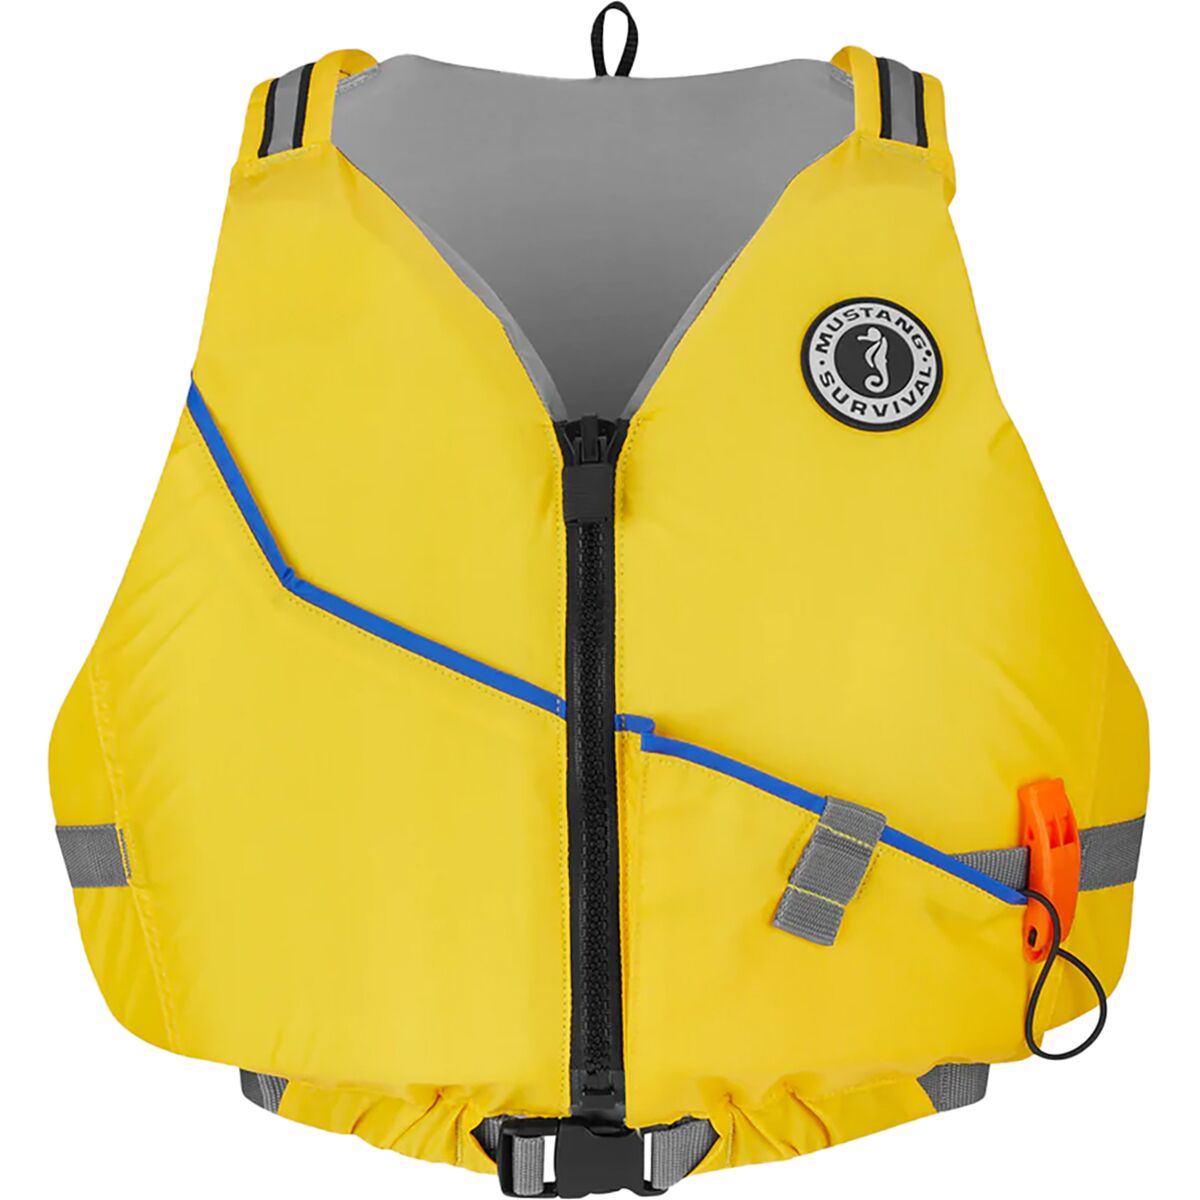 Mustang Survival Journey Personal Flotation Device